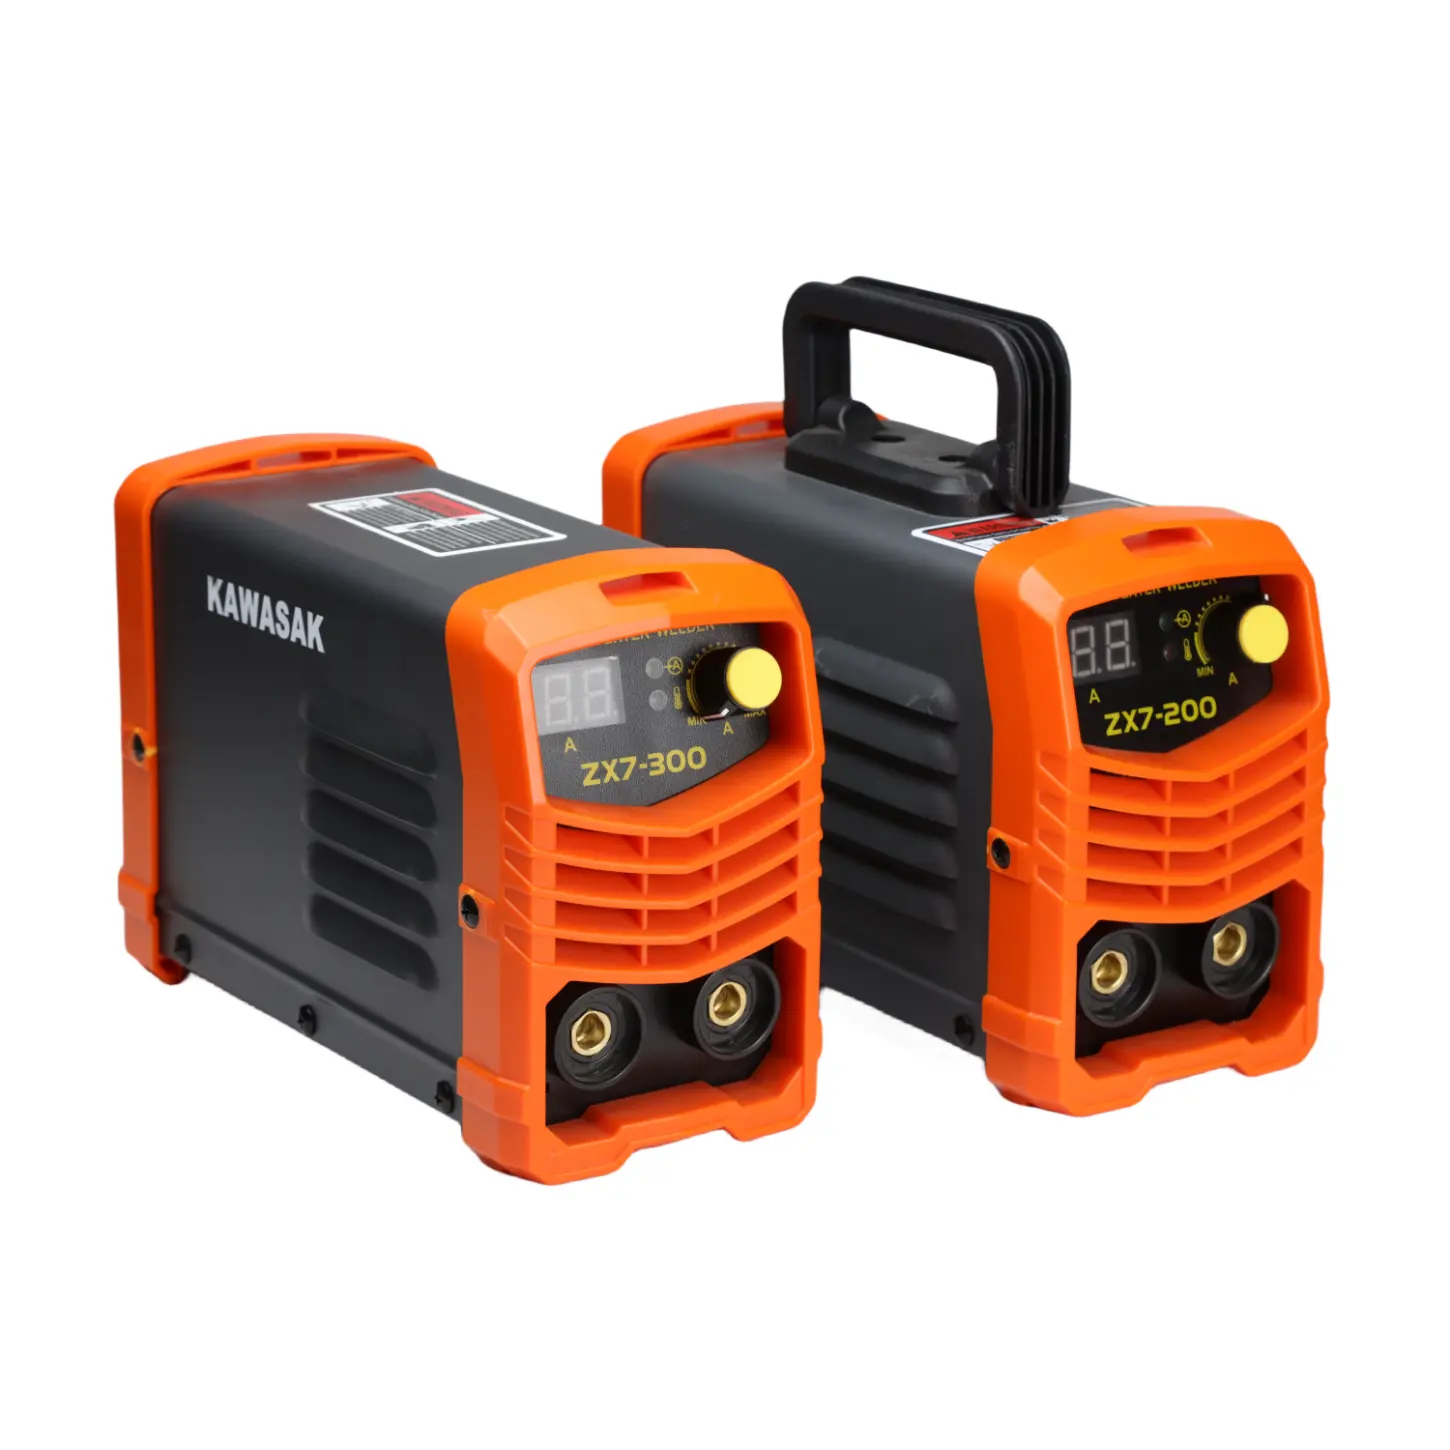 Top quality Mini MMA welding machine Portable welder competitive prices for Arc Welding